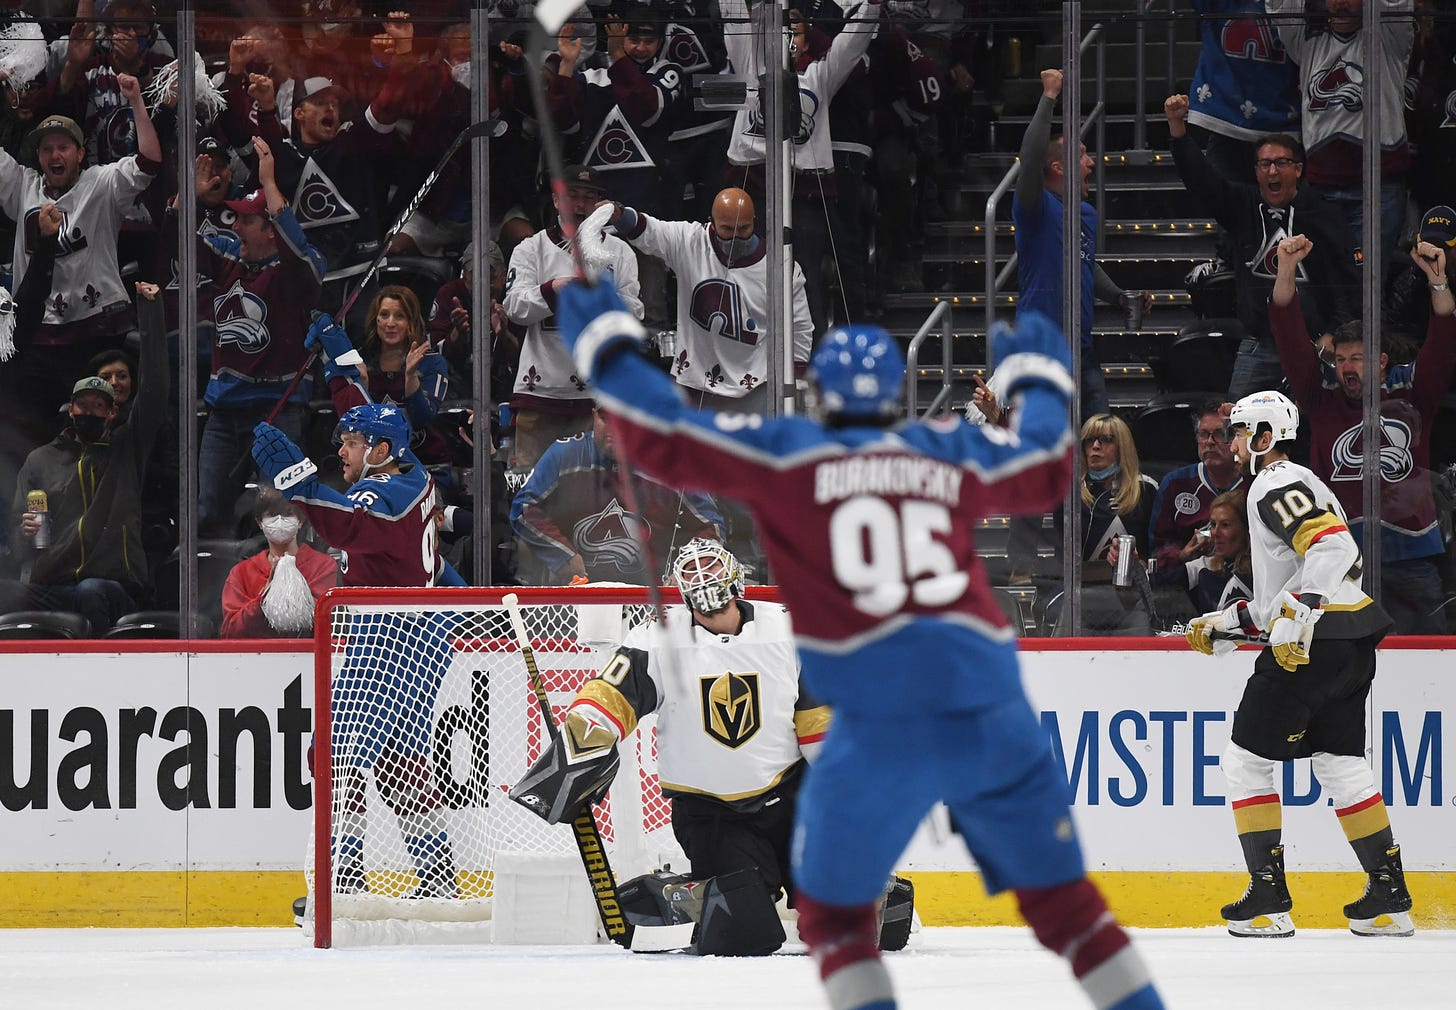 Avalanche crushes Golden Knights 7-1 in chippy Game 1 – The Denver Post